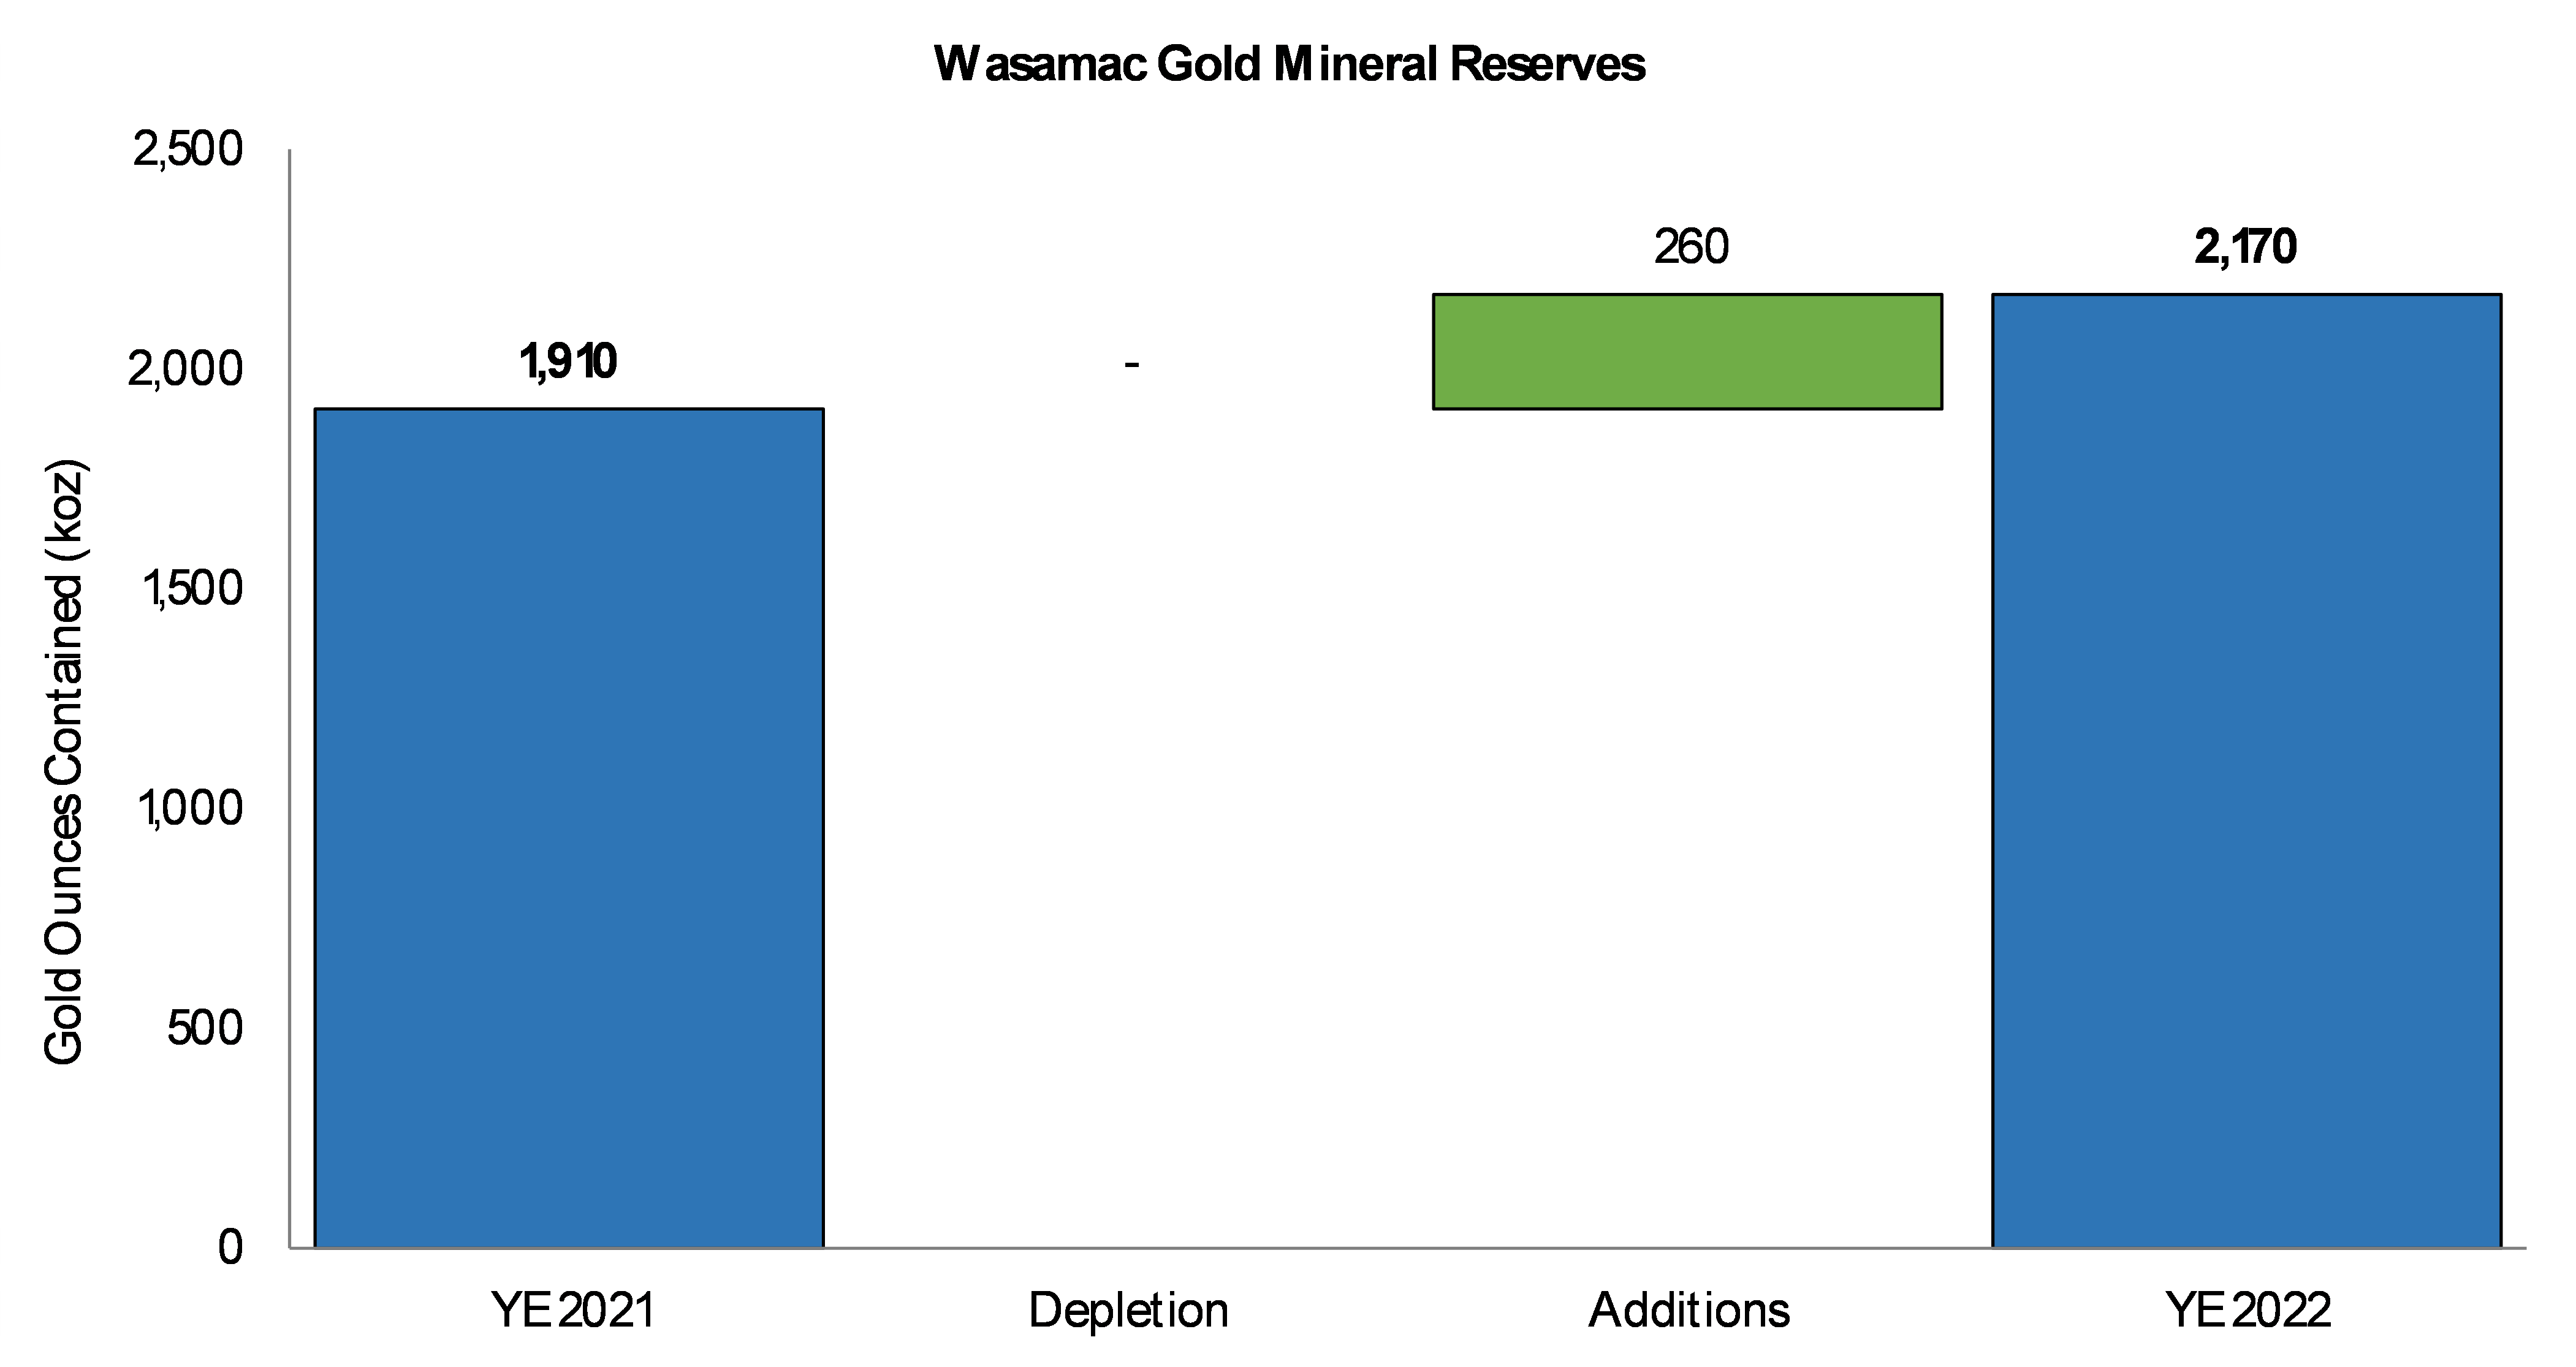 Change in Proven and Probable Mineral Reserves at Wasamac